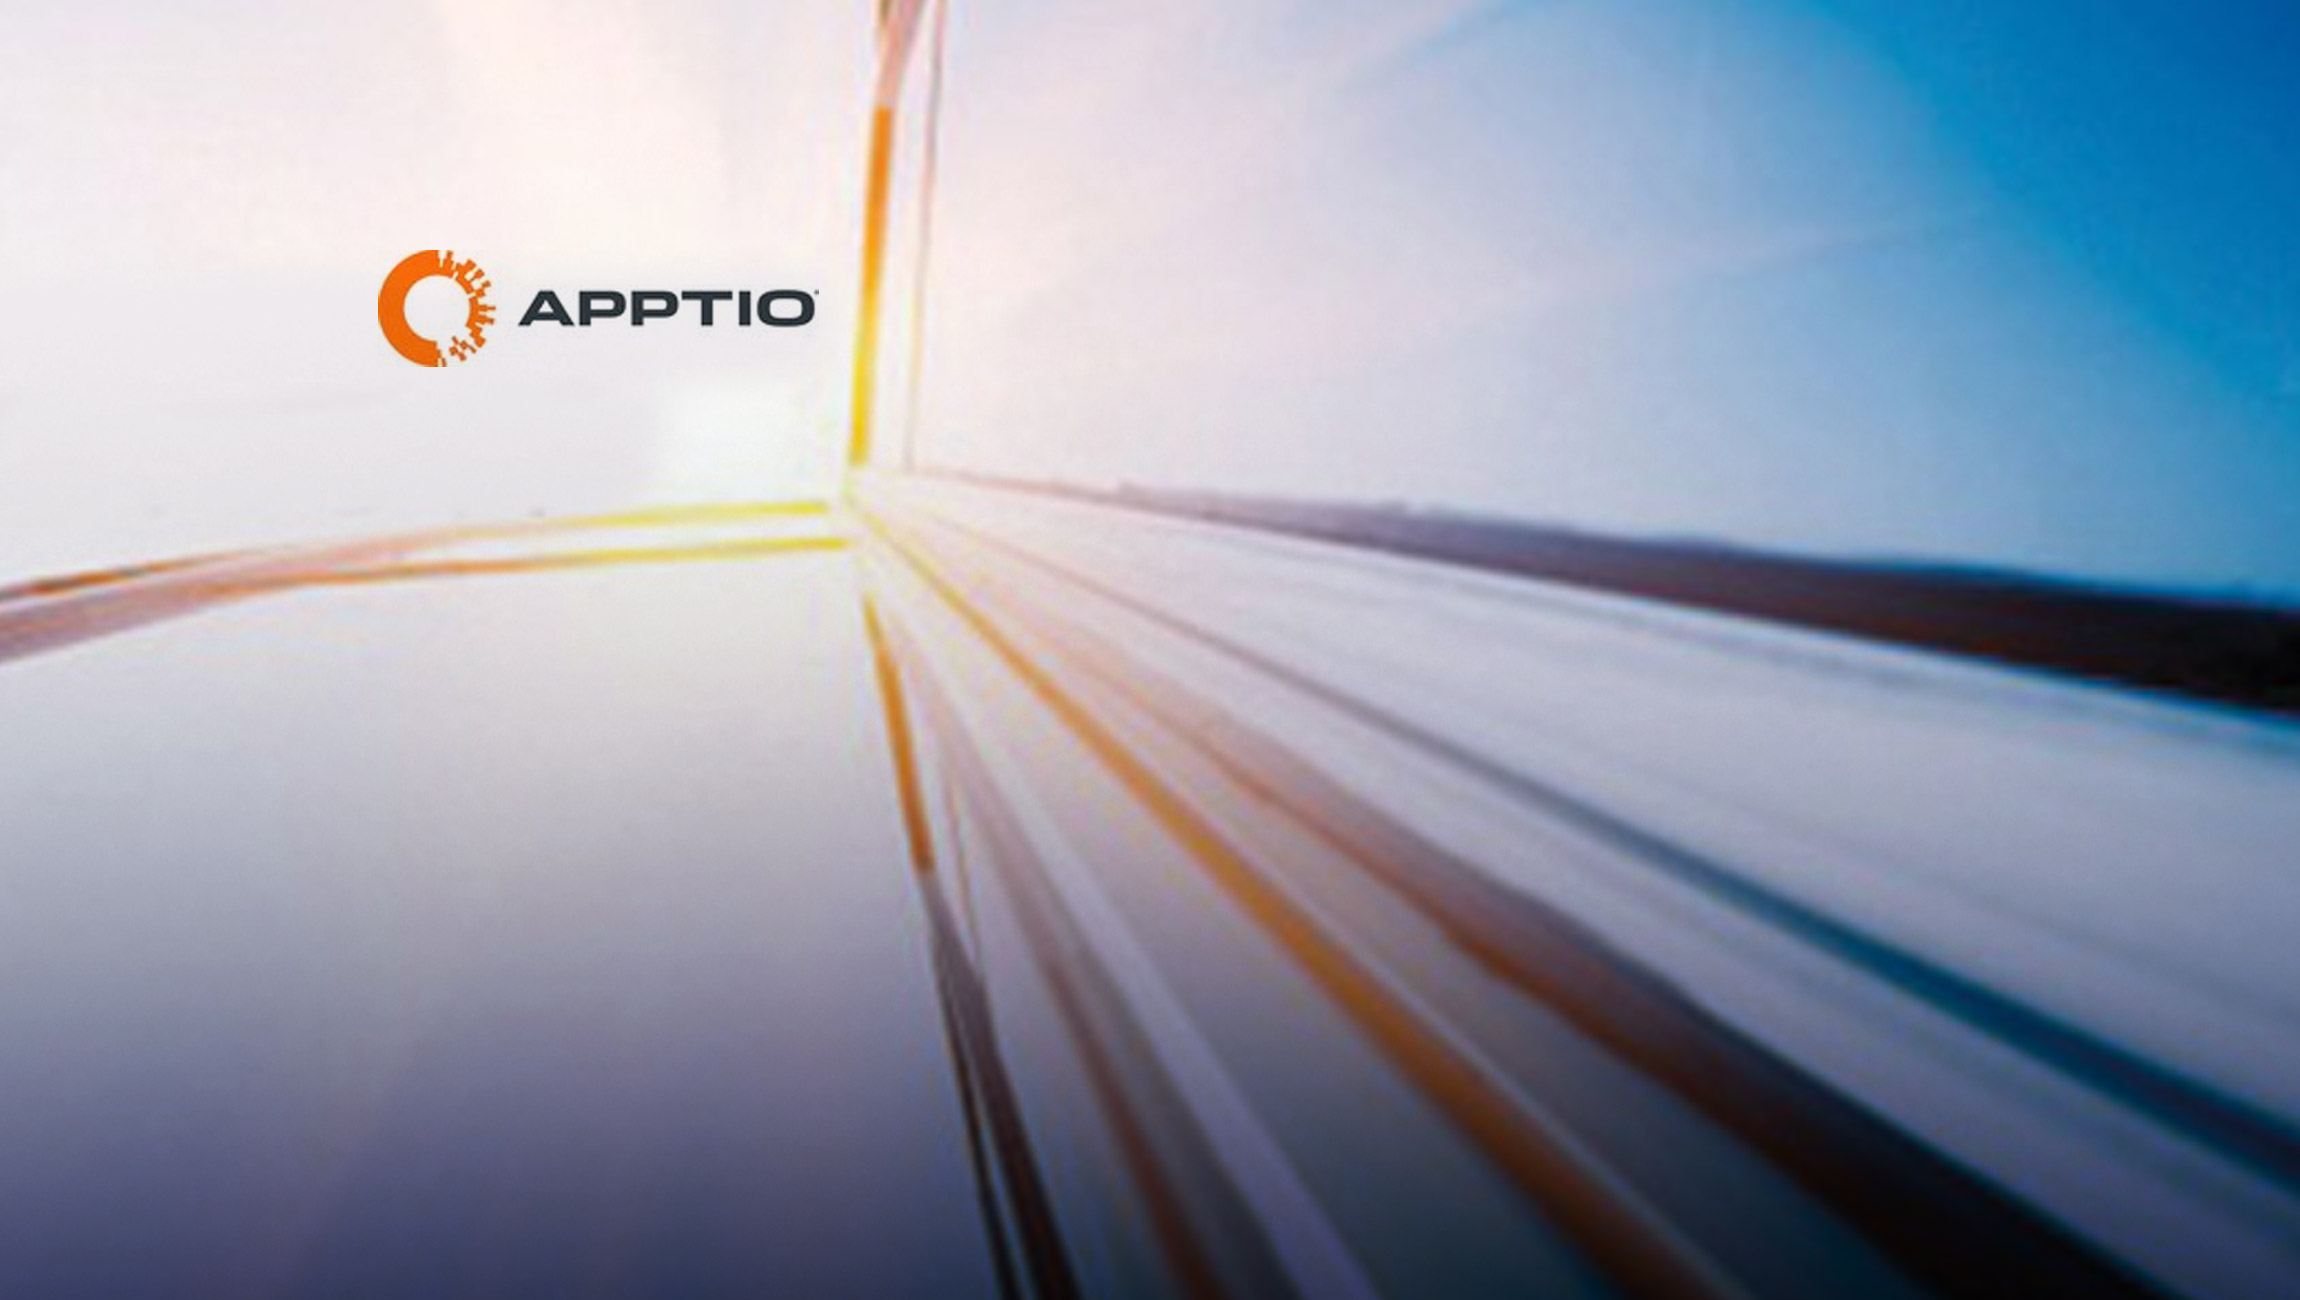 Apptio Collaborates with Microsoft to Provide End-to-End Visibility, Optimization and Decisioning on the Microsoft Cloud